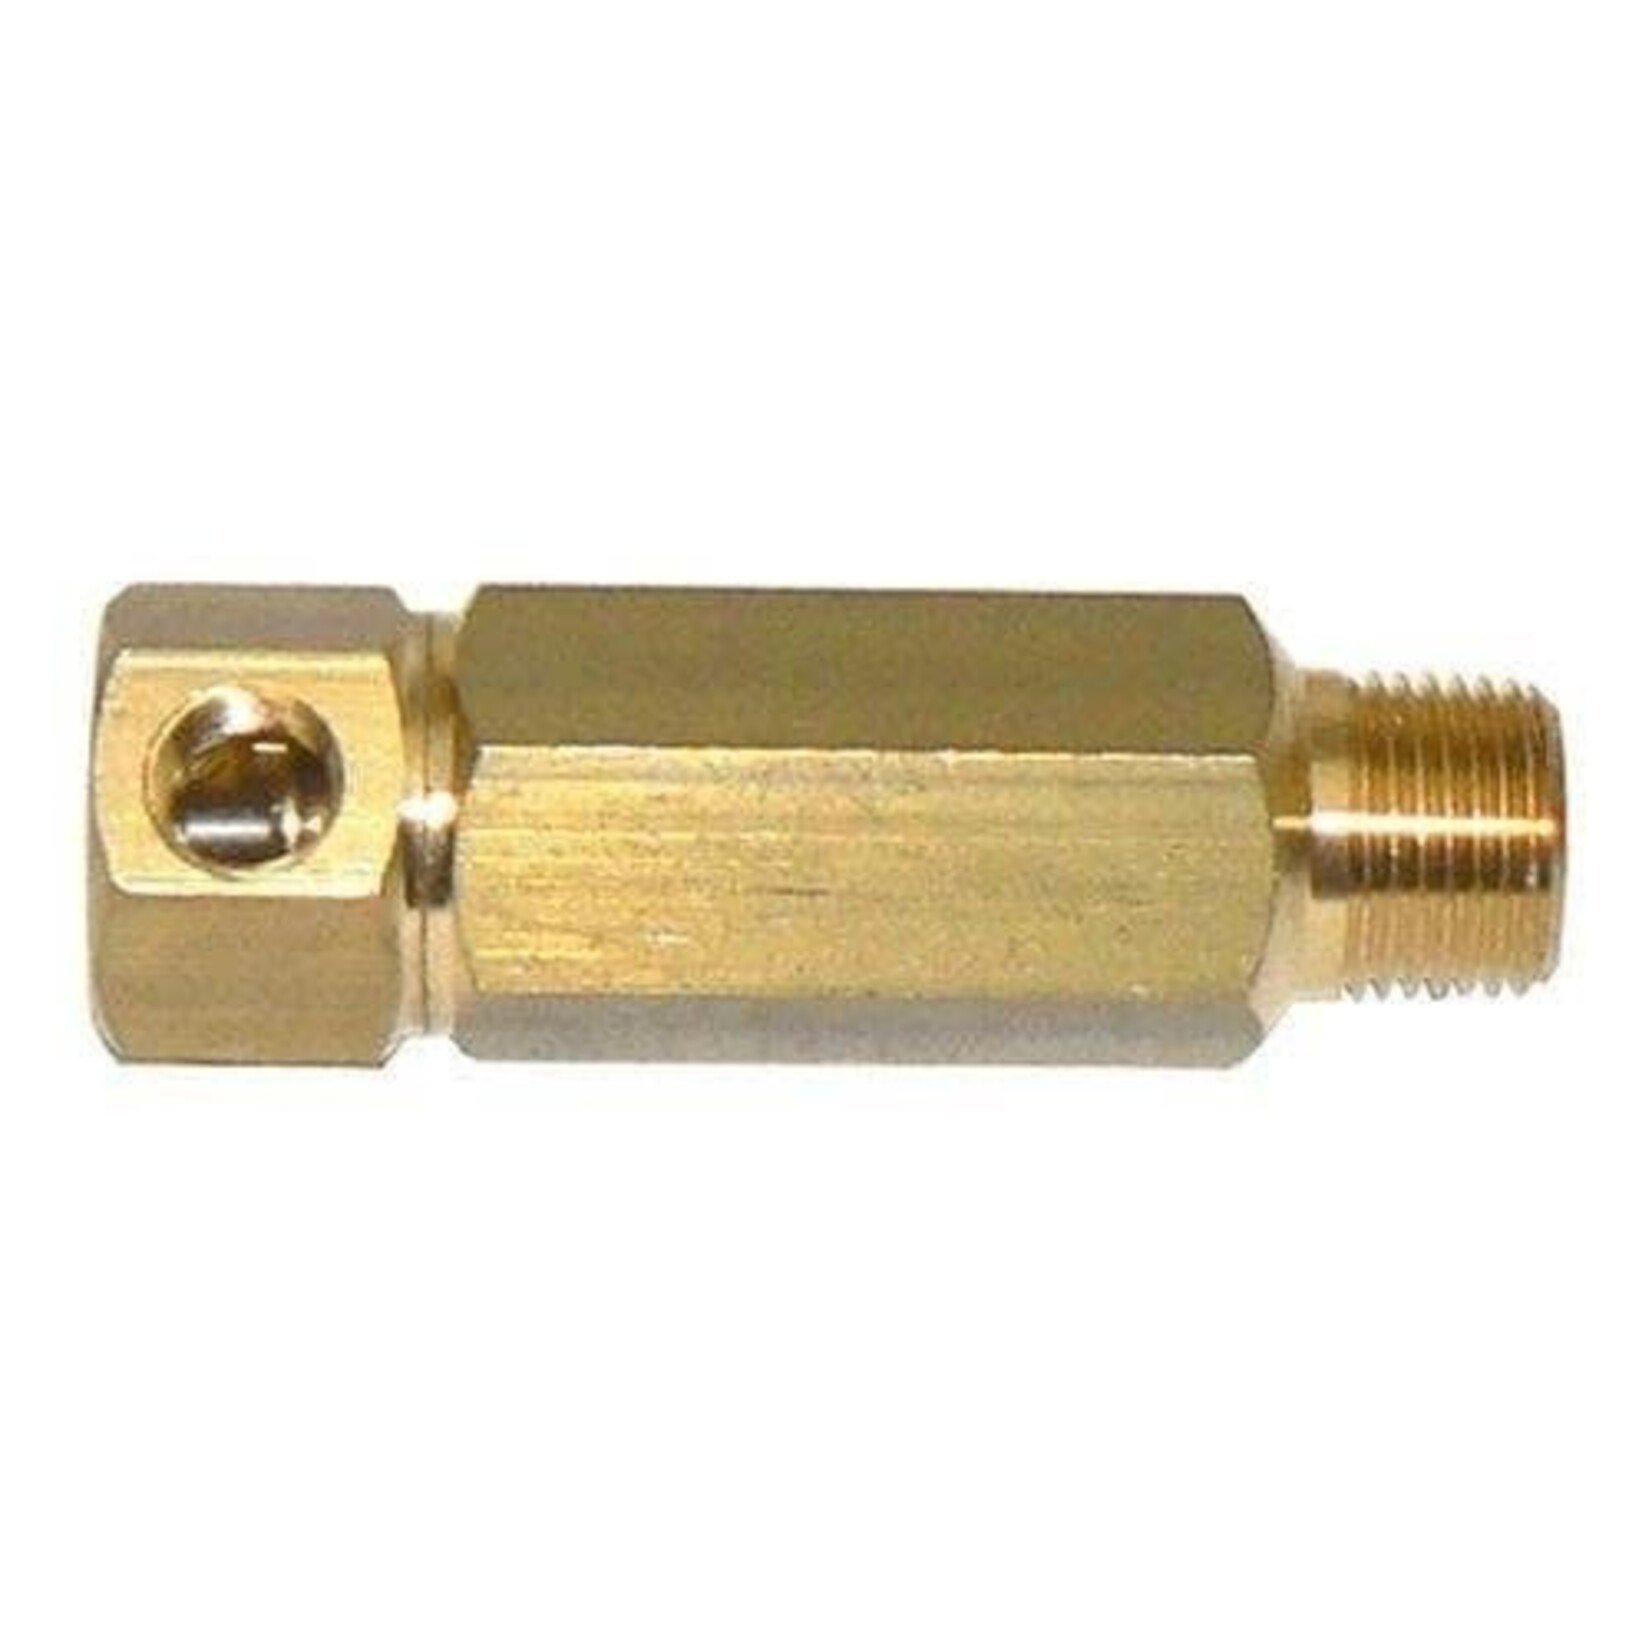 Cat Pumps Thermo Valve 3/8"